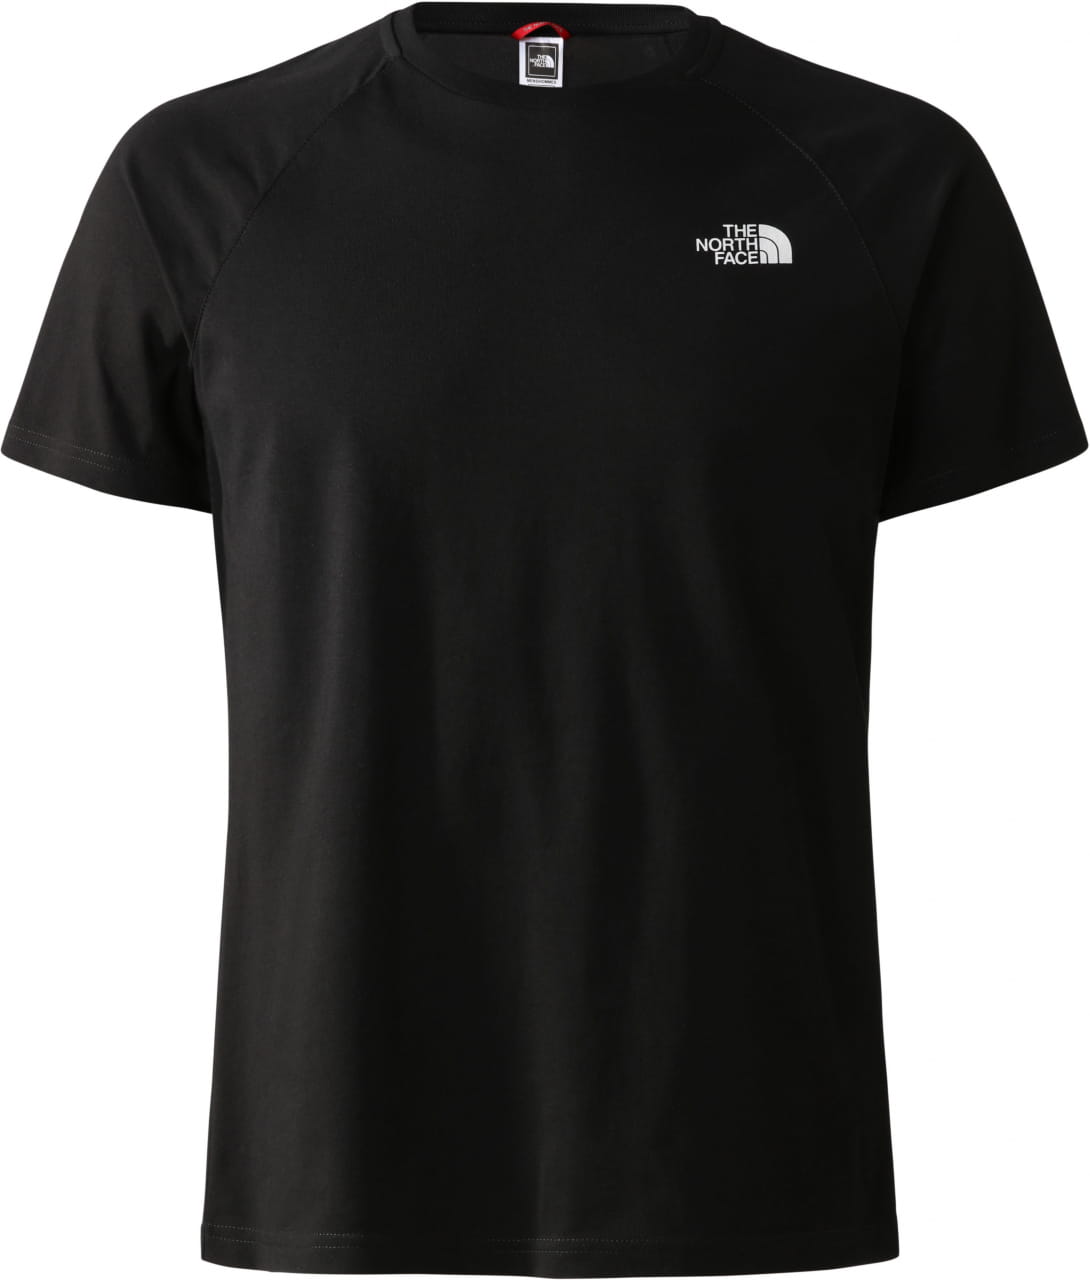 Camiseta deportiva de hombre The North Face M S/S North Faces Tee